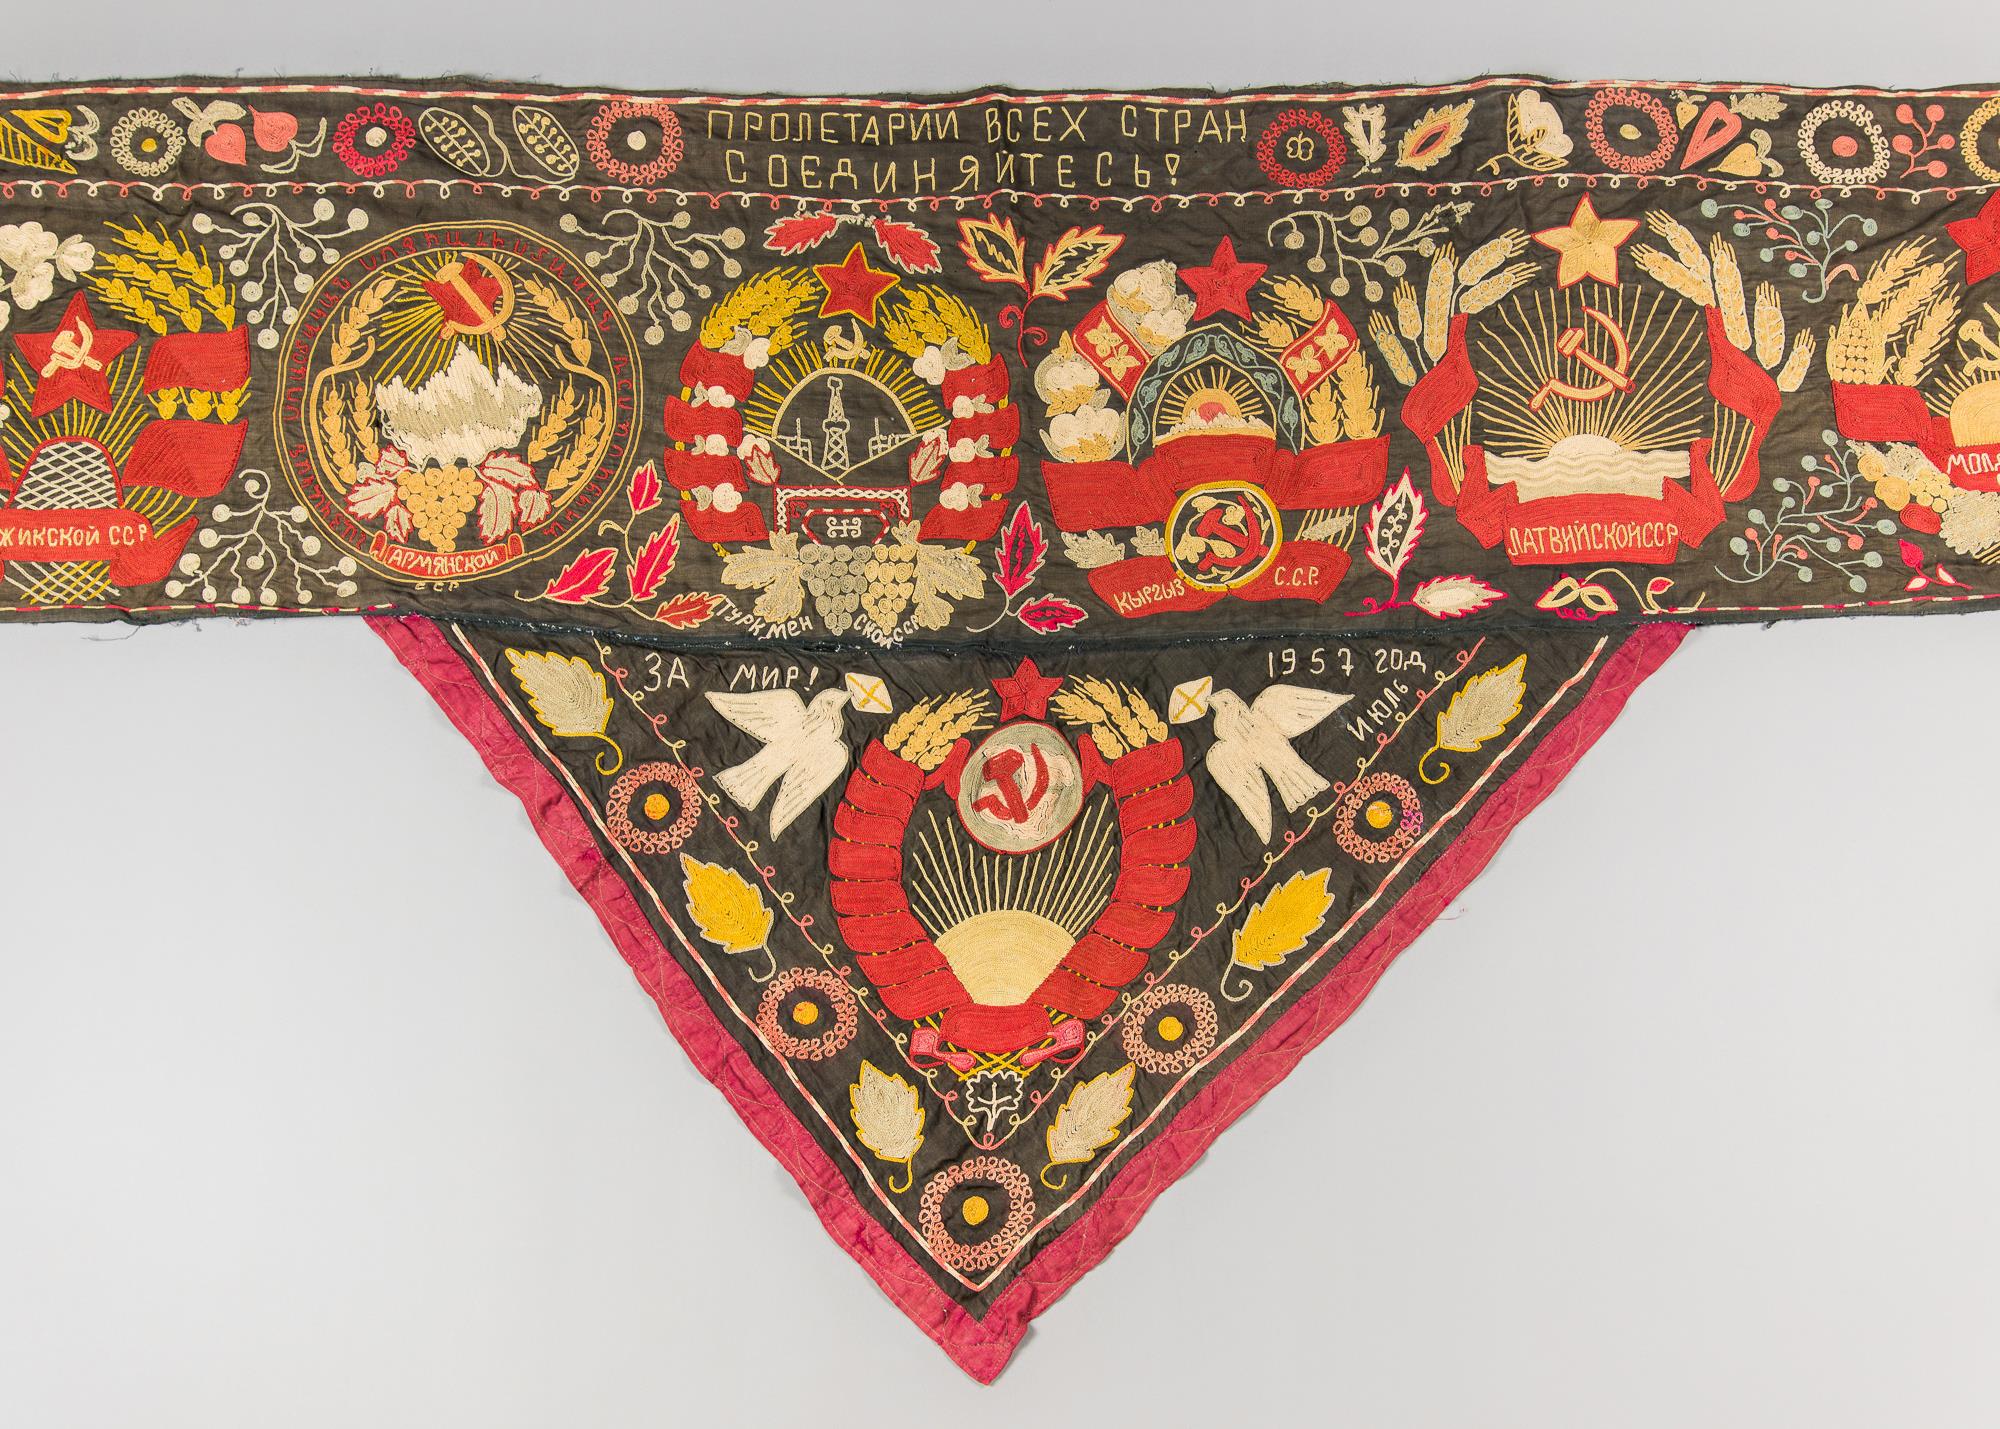 A RARE RUSSIAN SOVIET ERA TEXTILE PATCHWORK WALL HANGING. Dated 1957. (h 150cm x w 236cm)